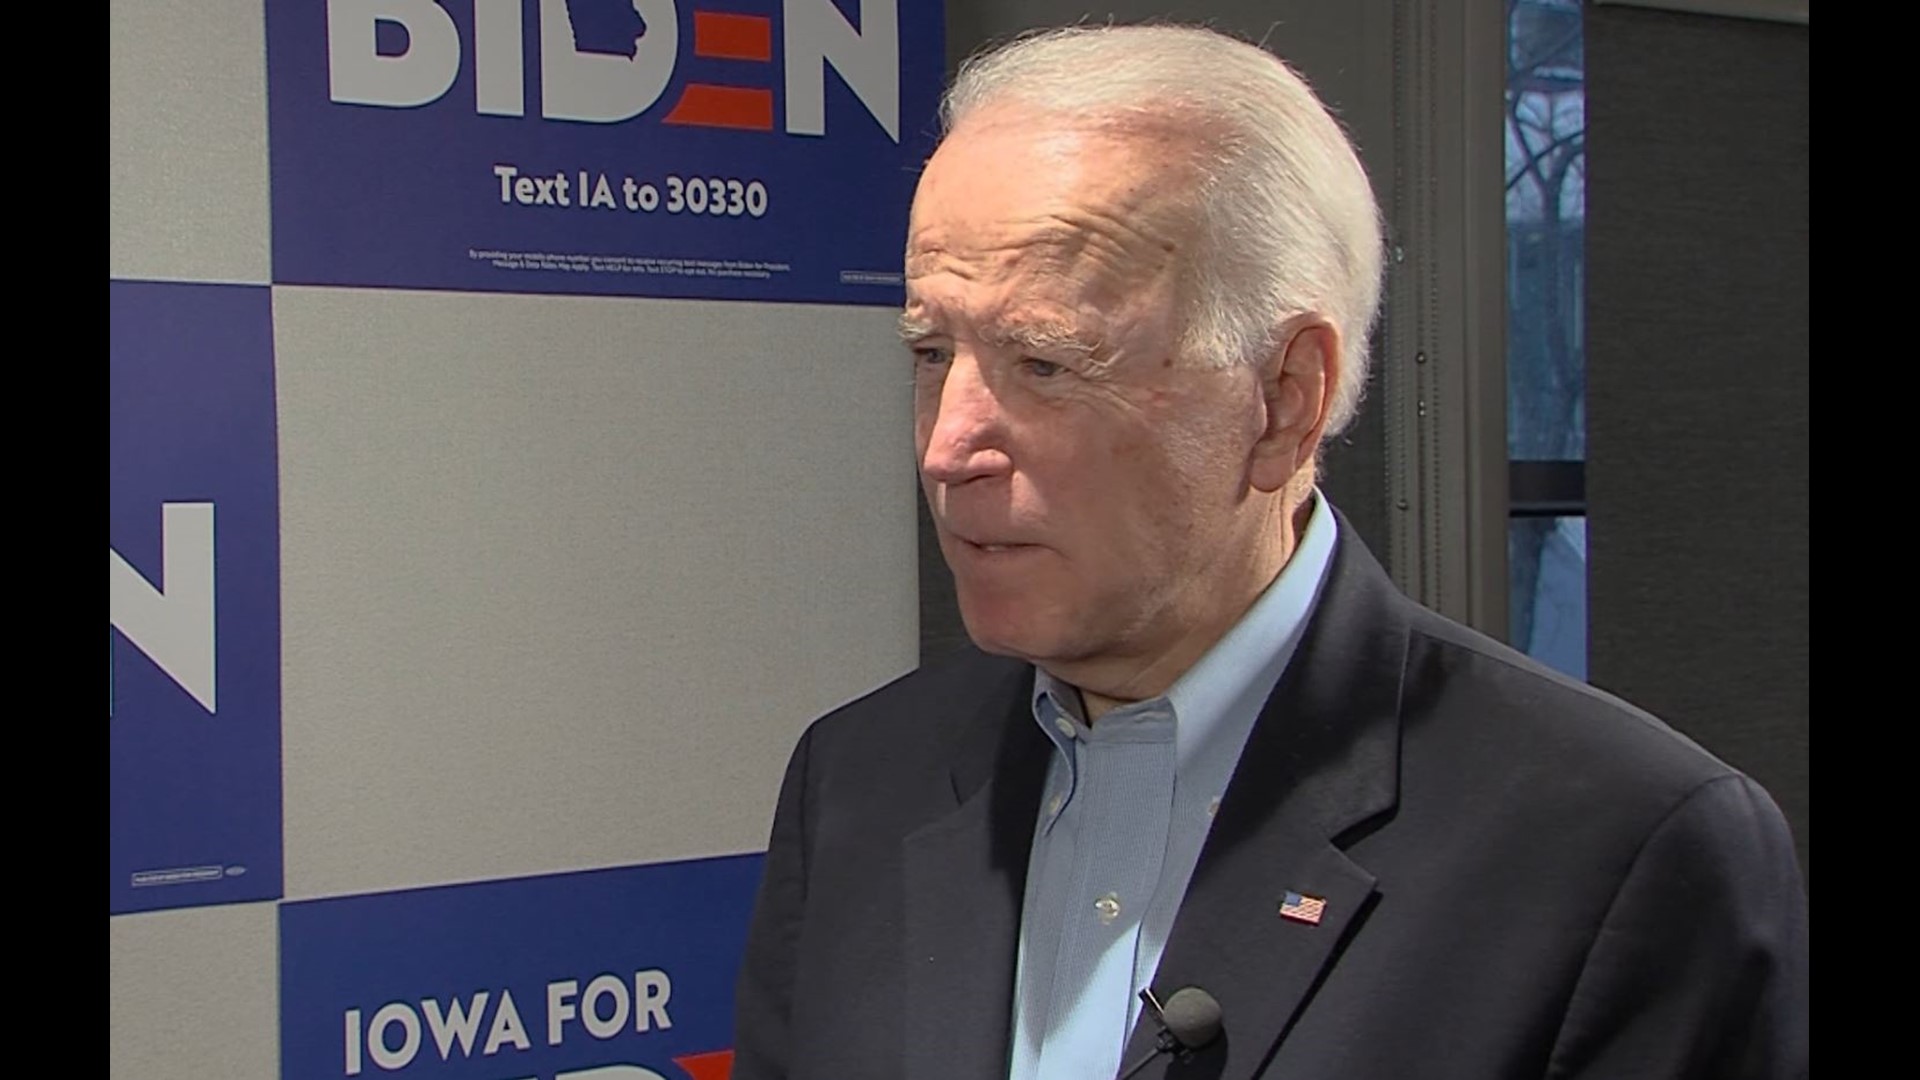 Biden says 'character is on the ballot' in 2020